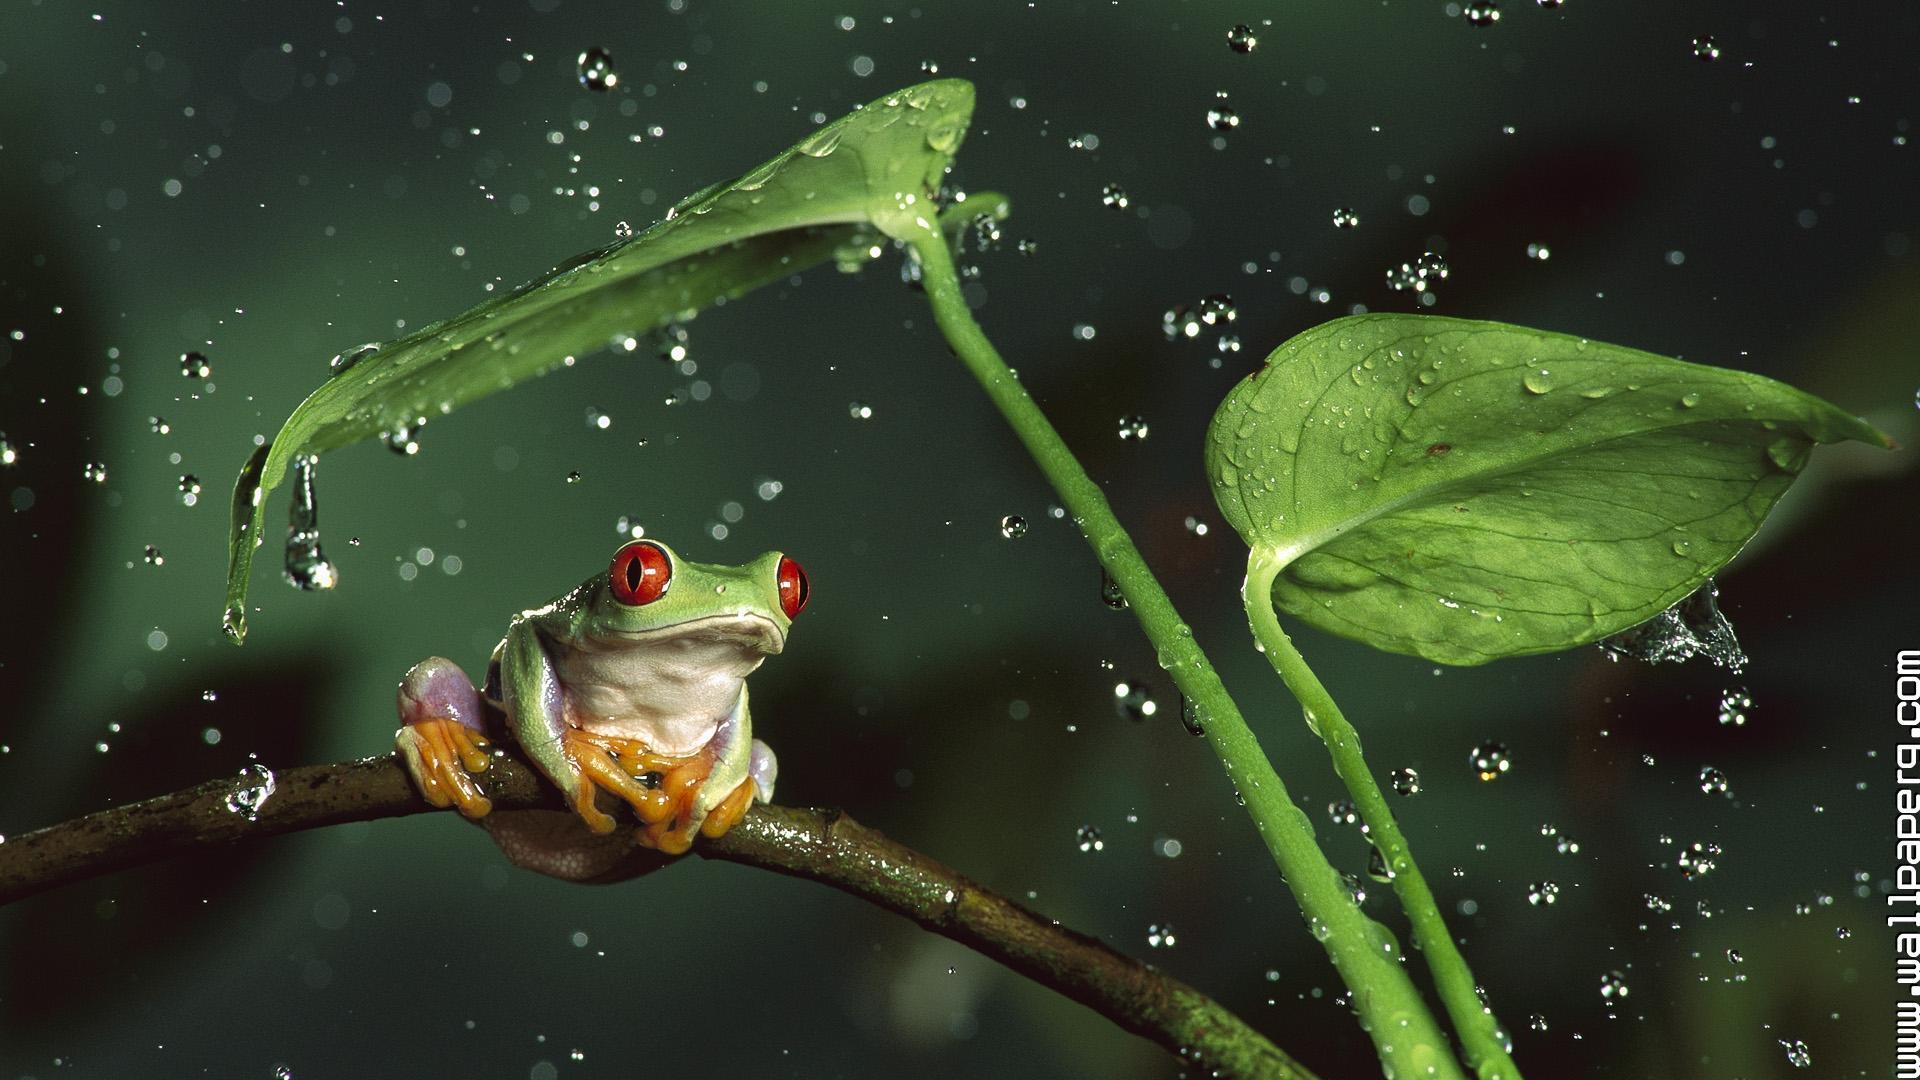 Download HD frog in rain monsoon image for your mobile cell phone